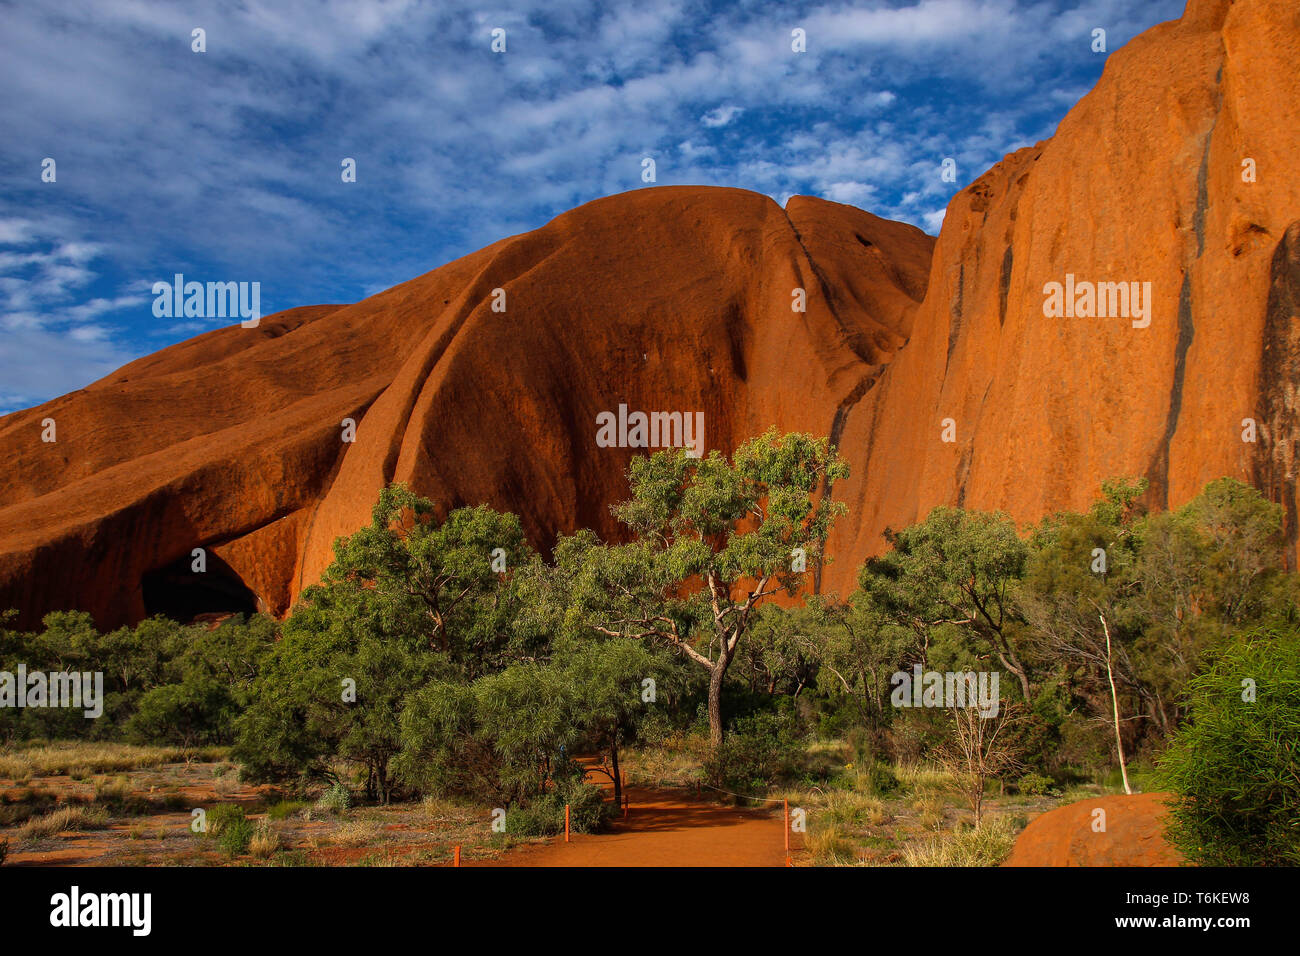 Desert Woodland Infront Of The Ayers Rock Or Uluru In The Red Heart Of Australia Stock Photo